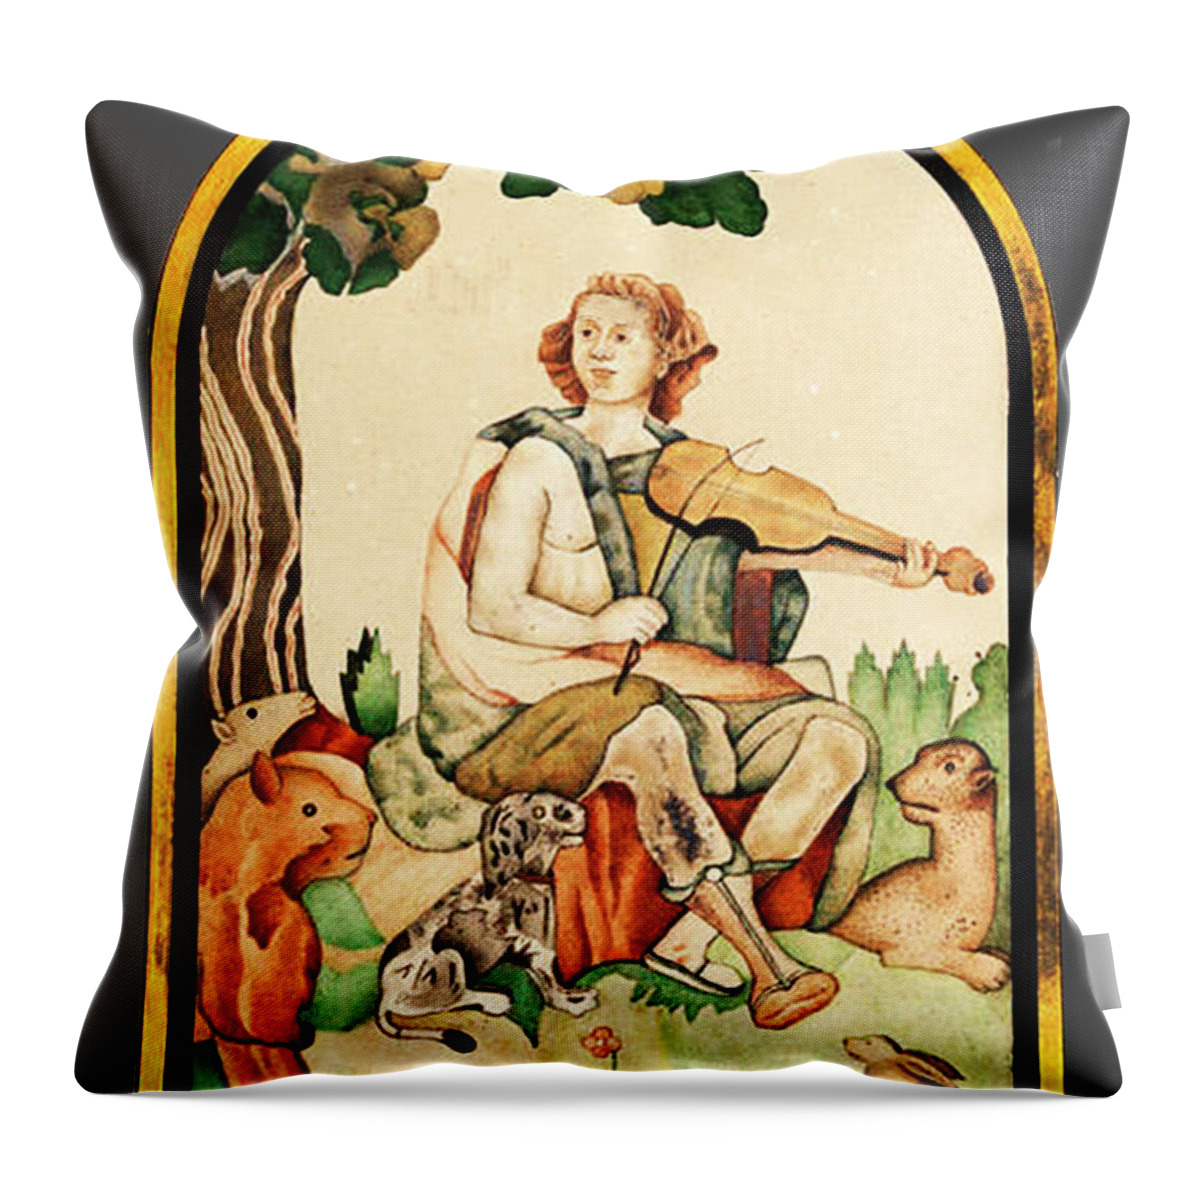 Orpheus Throw Pillow featuring the mixed media Orpheus by Asok Mukhopadhyay